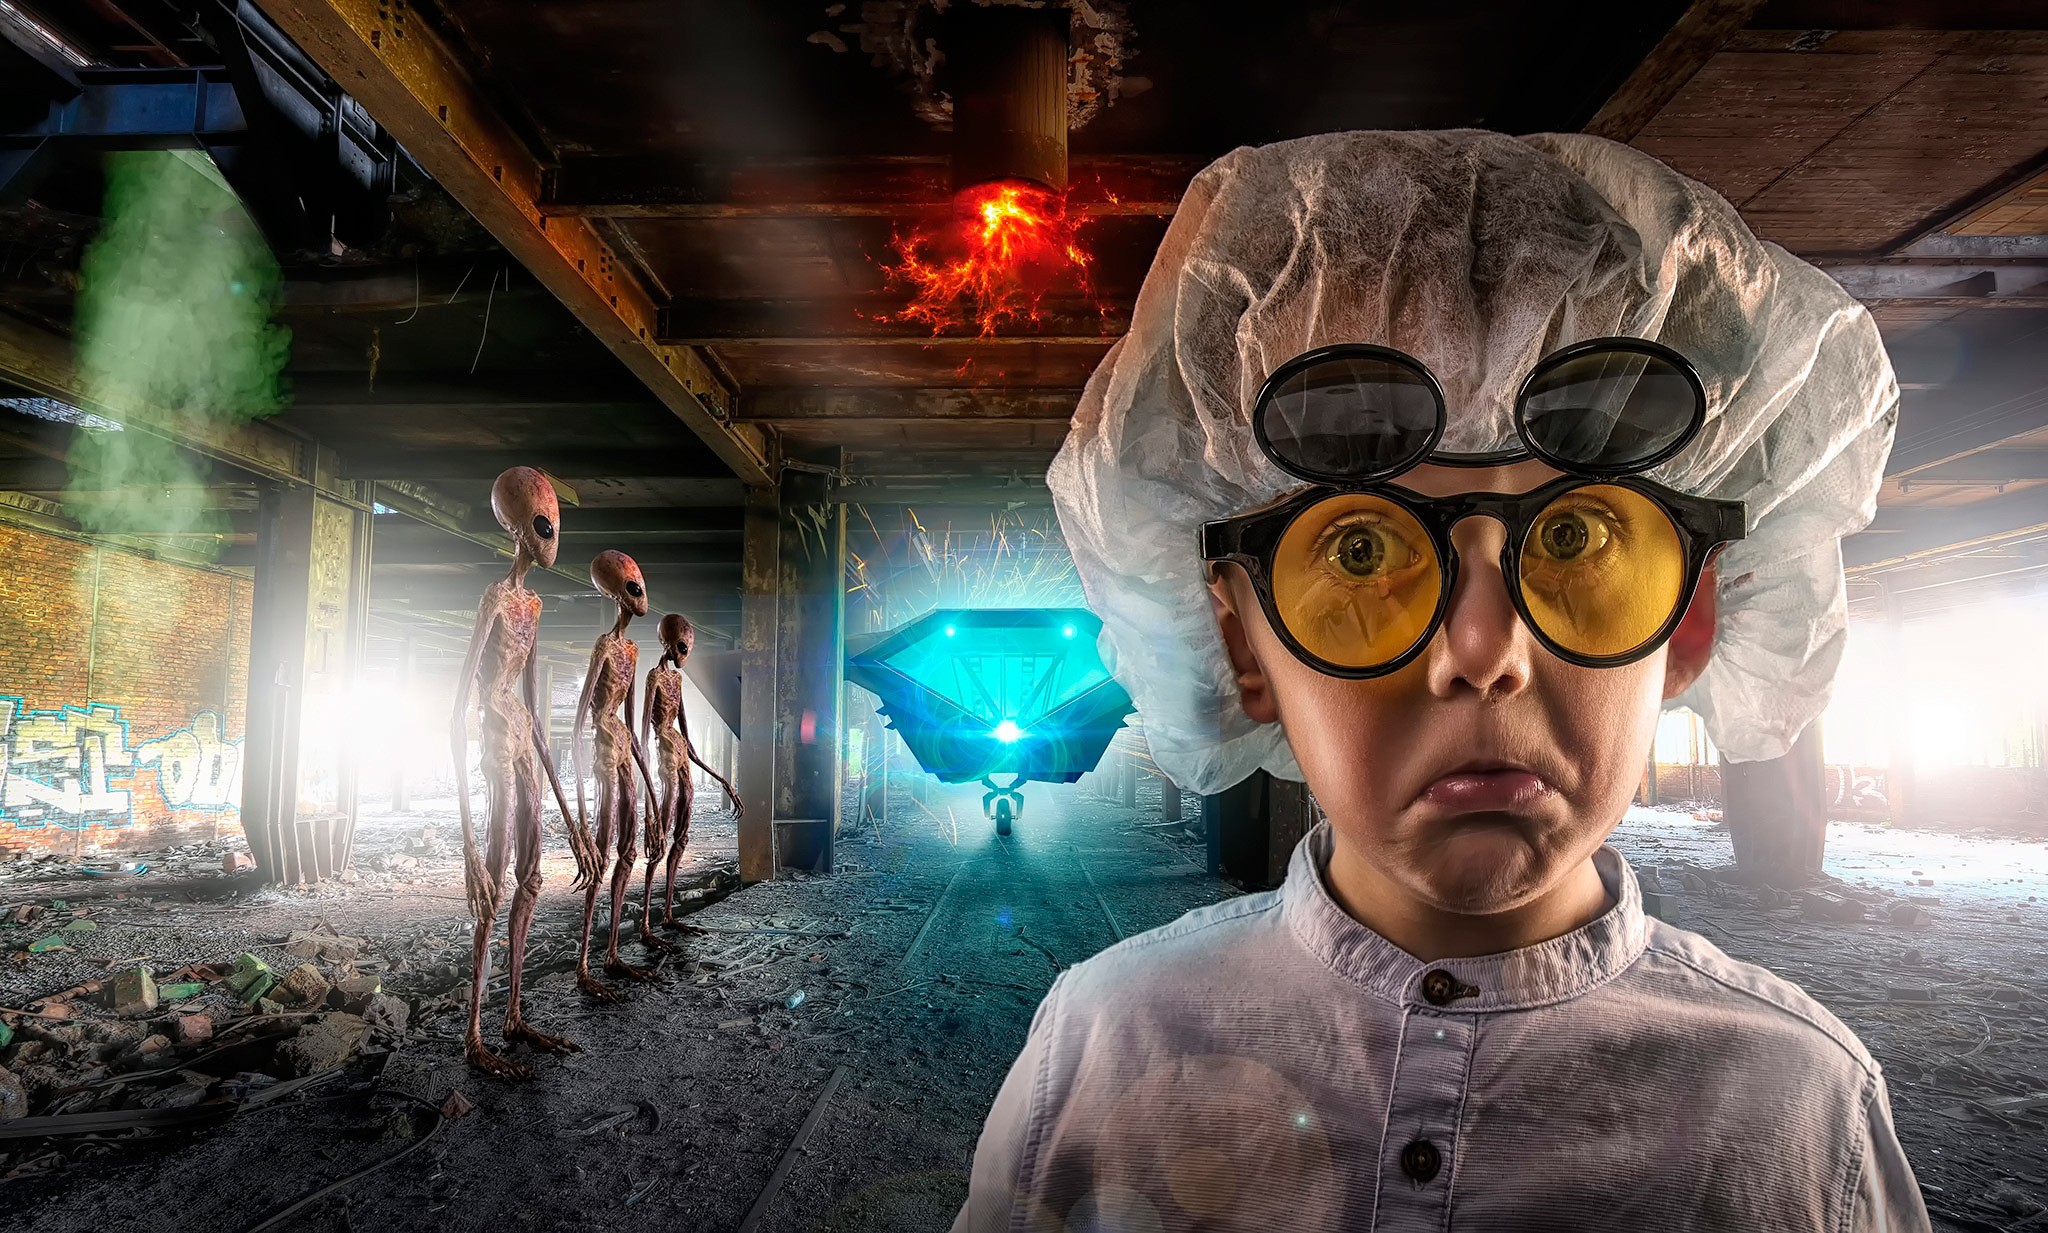 People 2048x1233 photo manipulation face glasses aliens abandoned building fire dust bricks rooftops